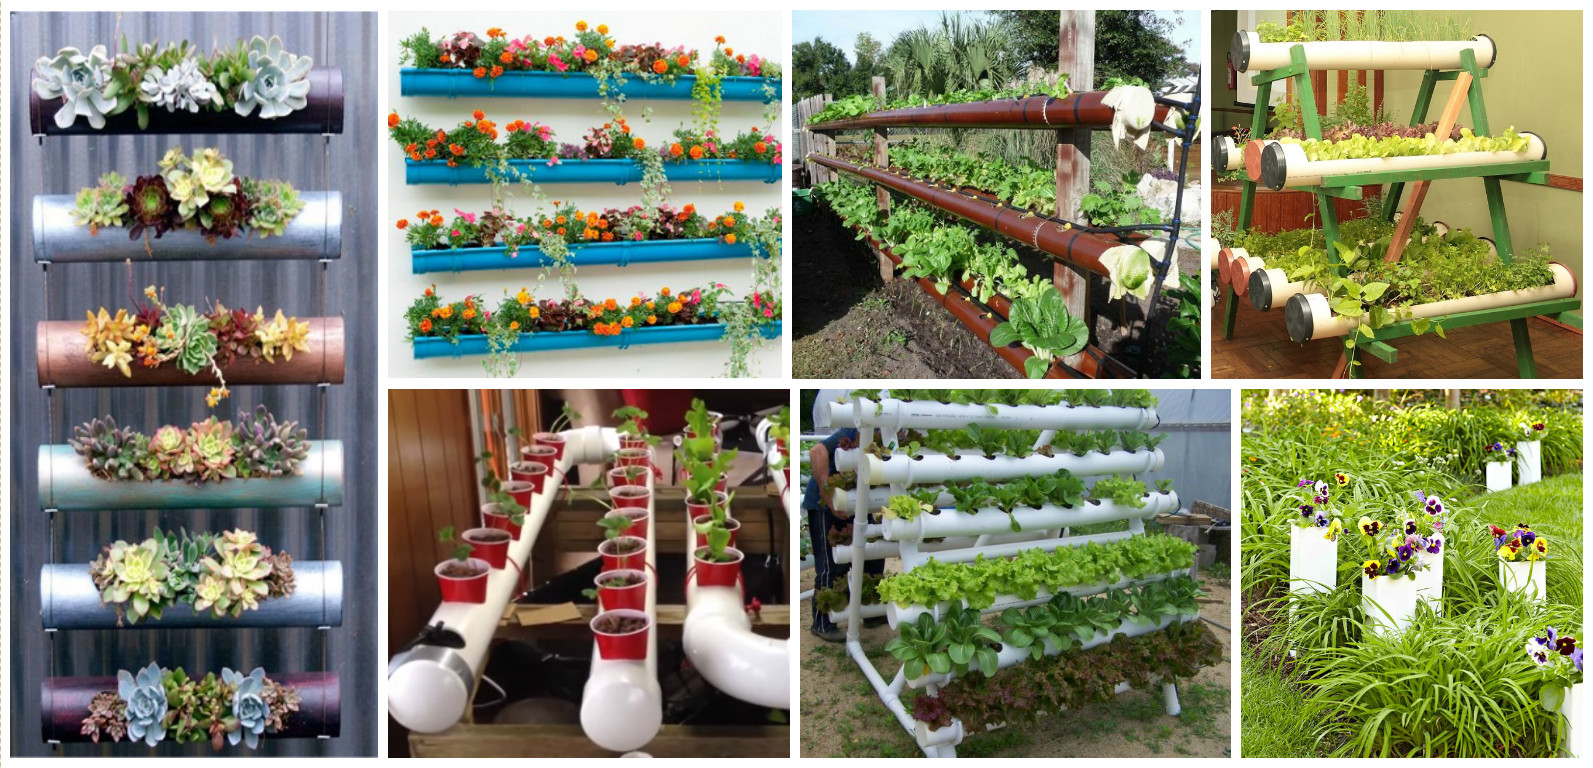 12 Amazing PVC Pipe Planters To Liven Up Your Garden Ideas to Love